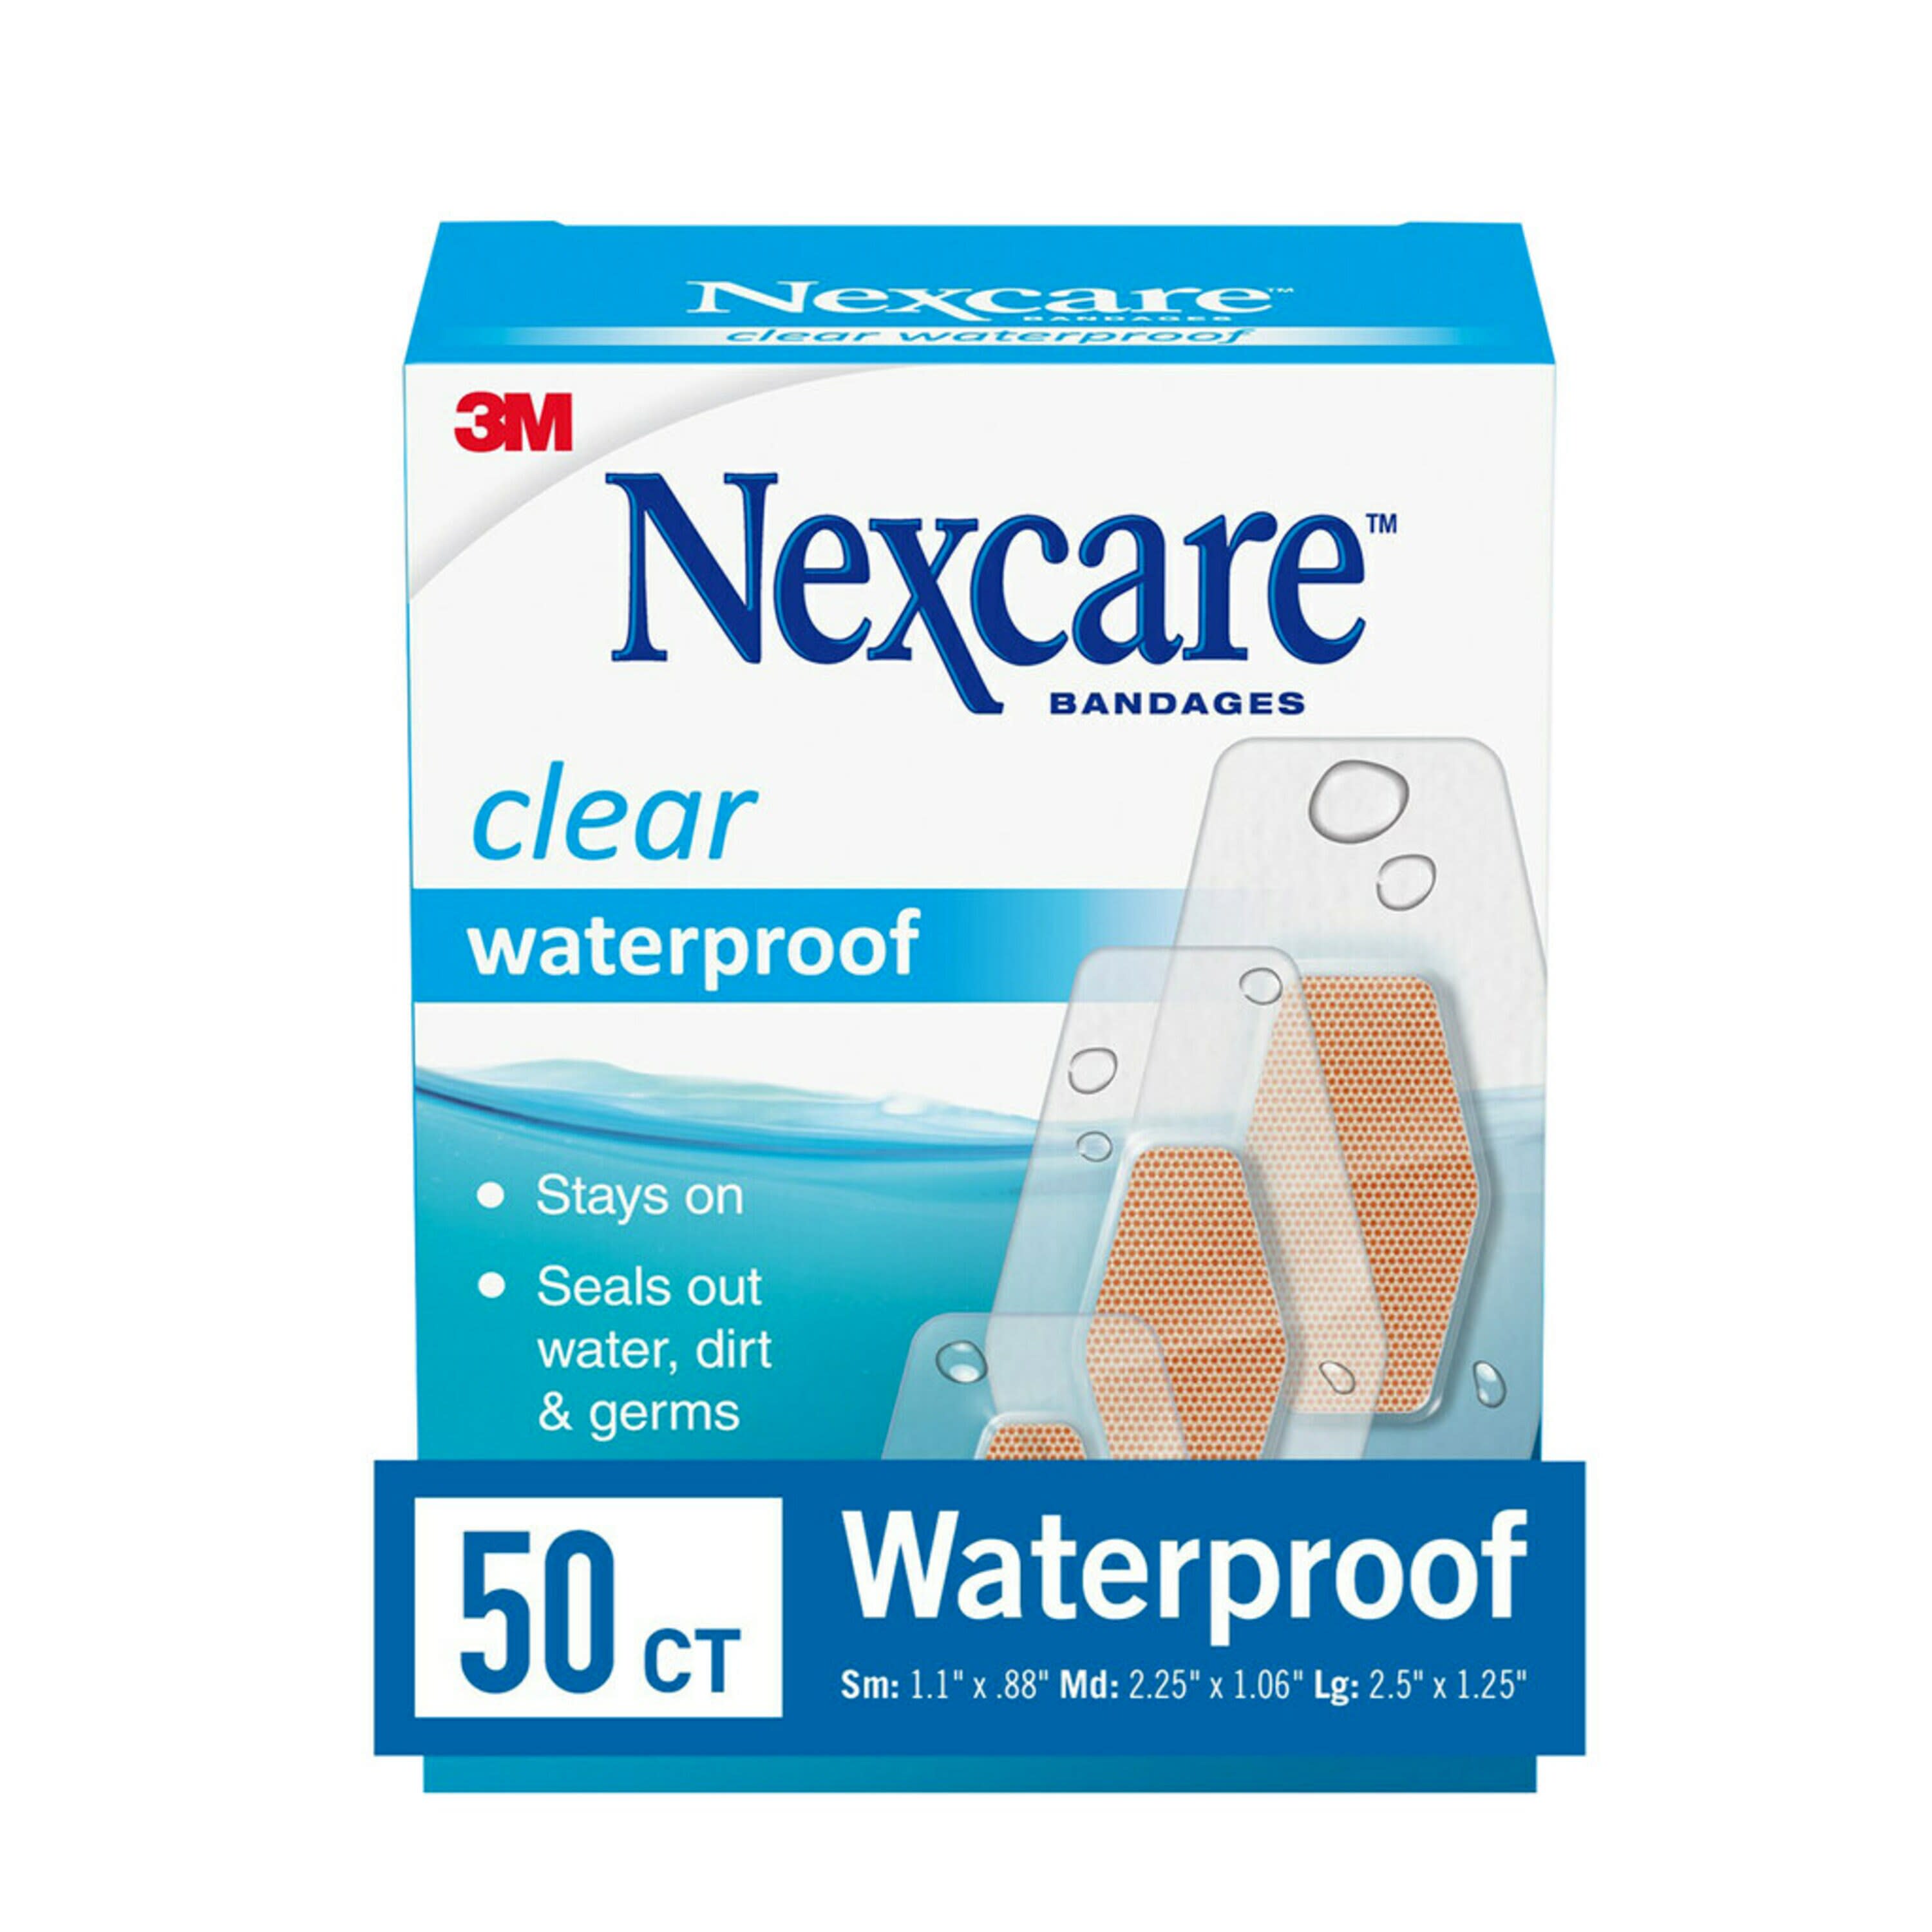 Nexcare Waterproof Bandages - Pack of 50 Bandages - image 3 of 19